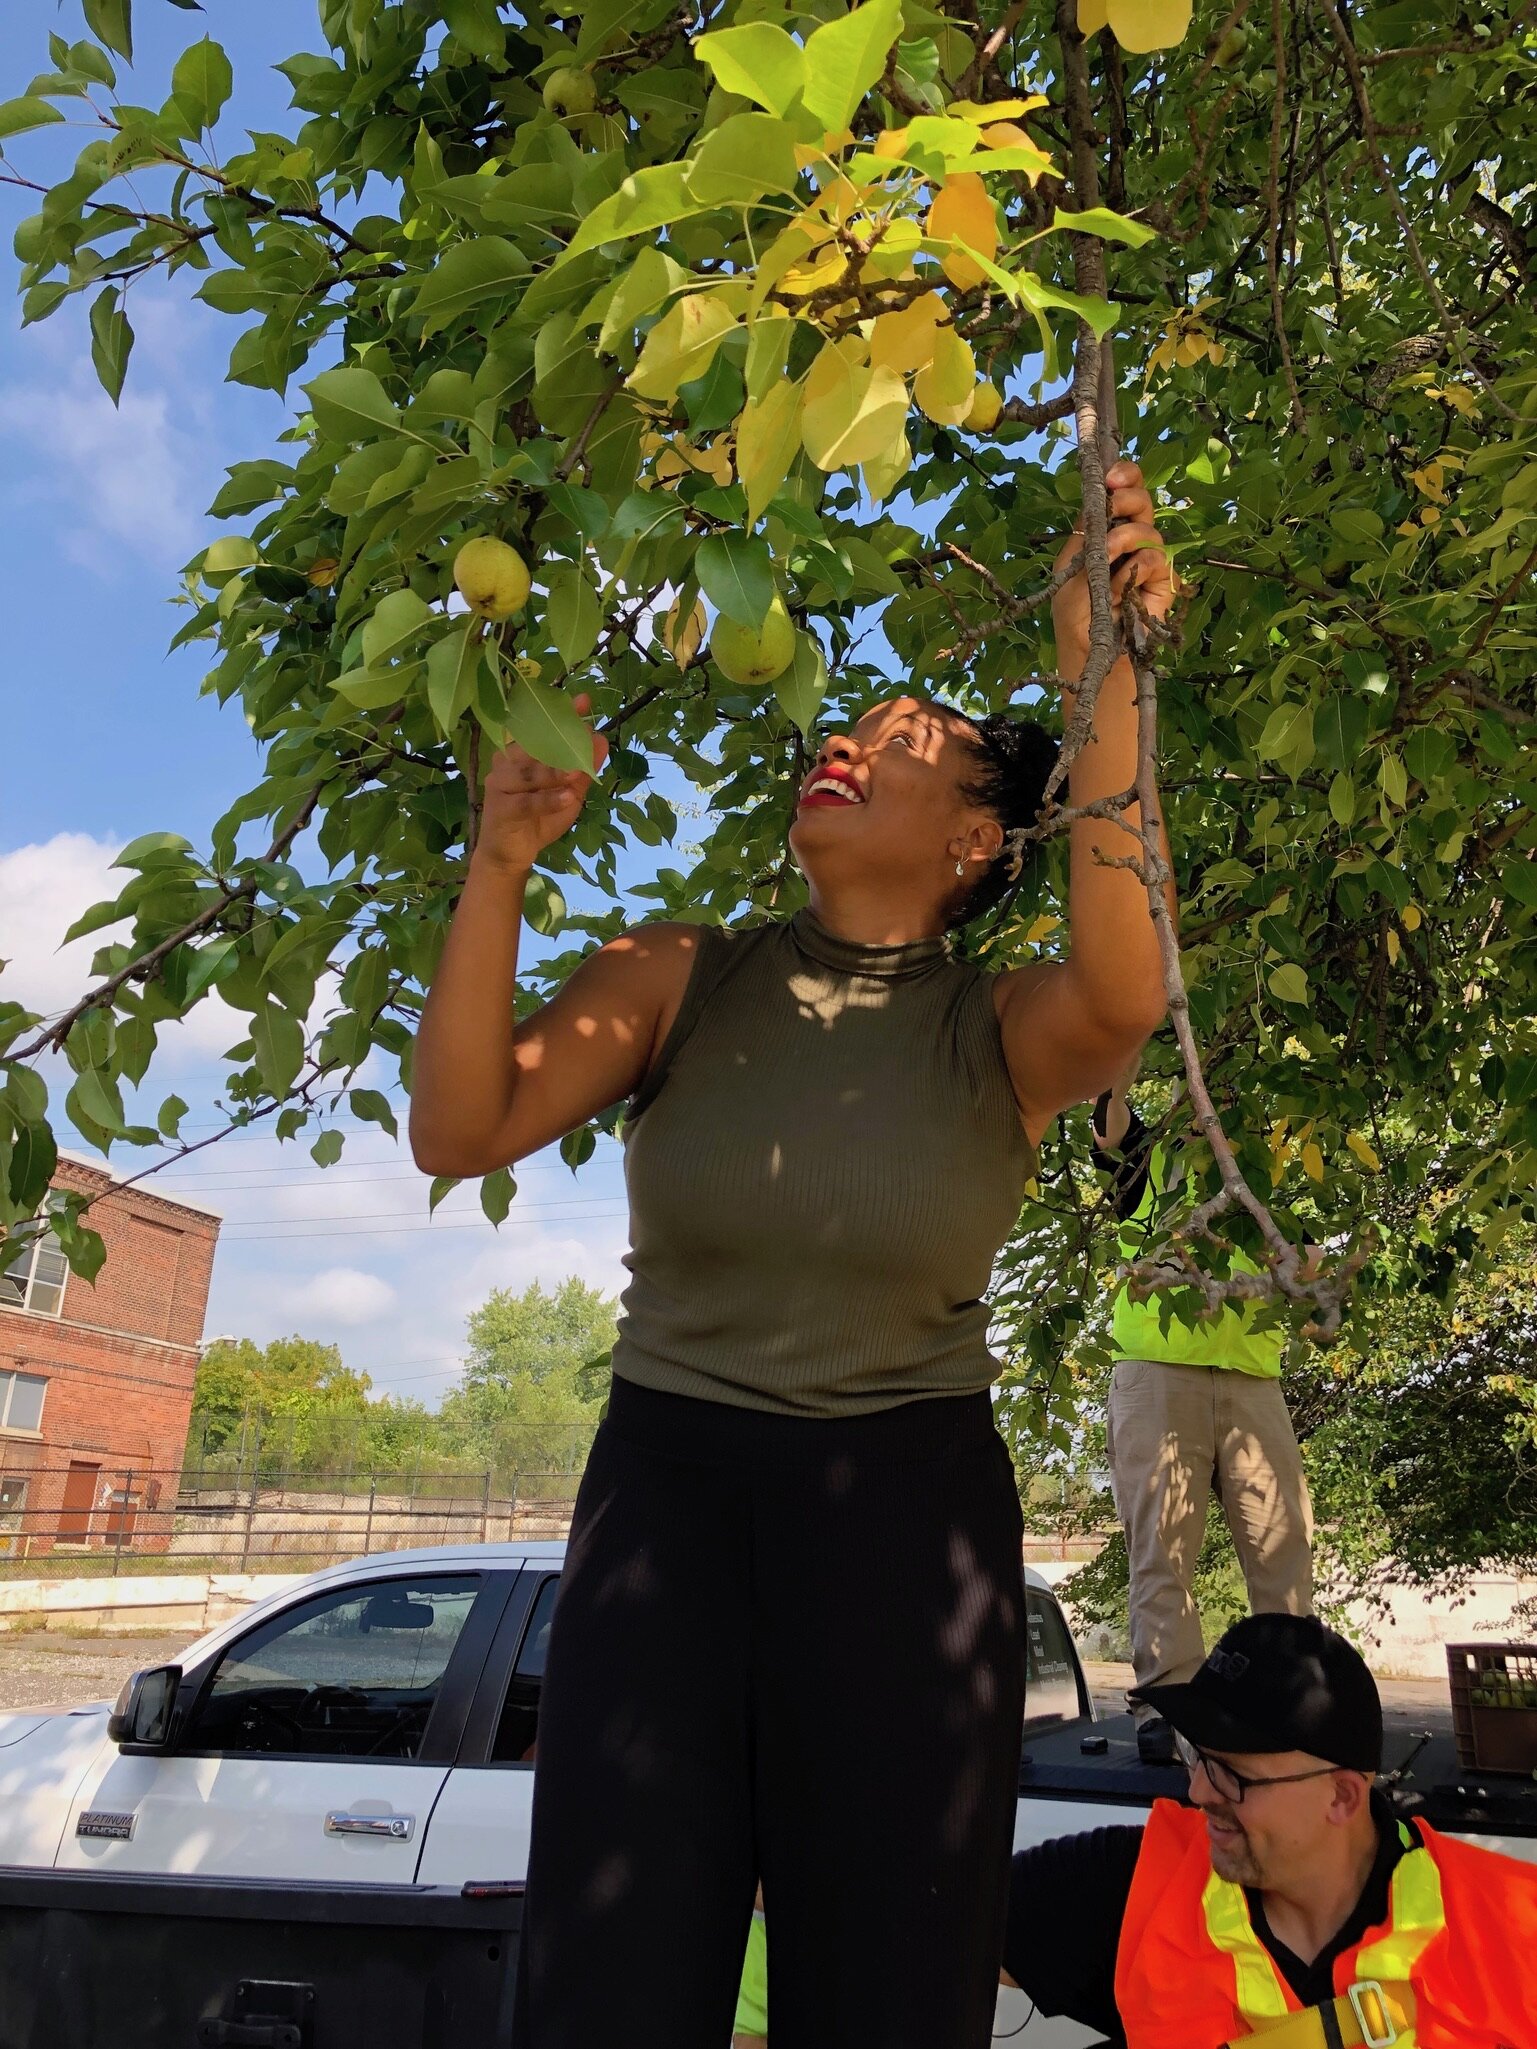 Volunteer Barbara Belli de Oliveira helps harvest pears from the tree at Electric Works.